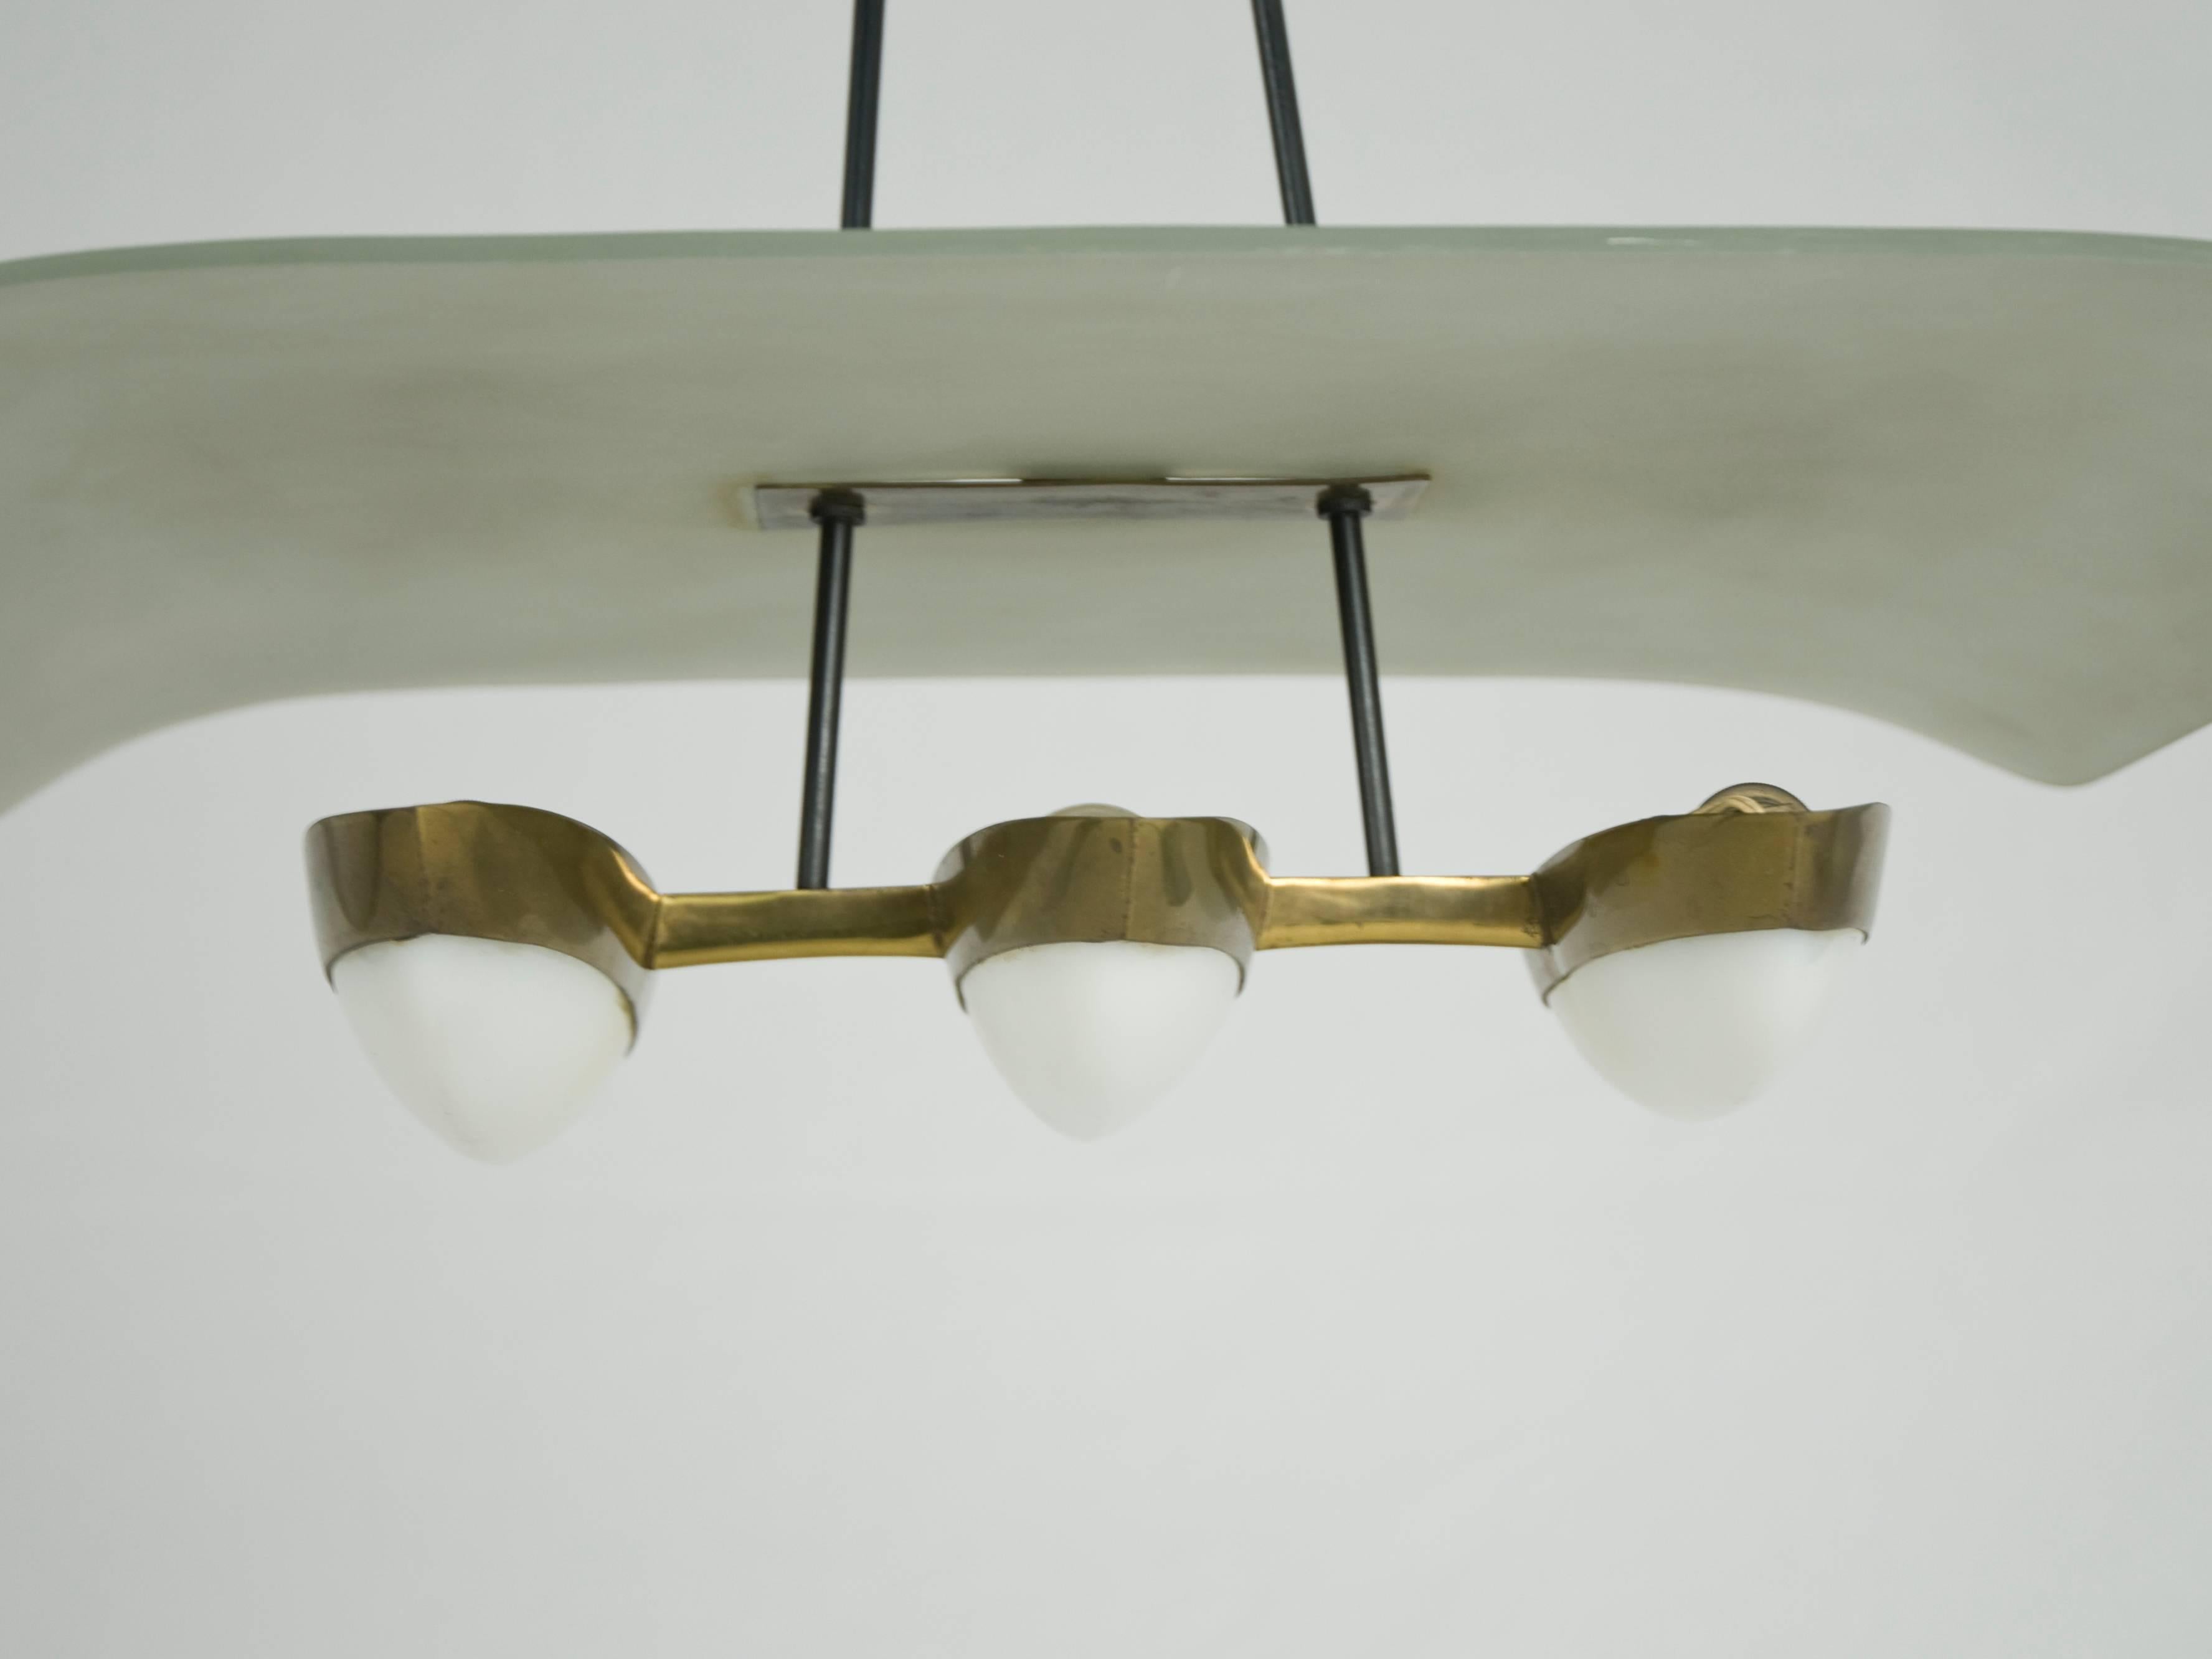 Painted Midcentury Three-Light Brass, Perspex & Glass Pendant Attributed to Arredoluce